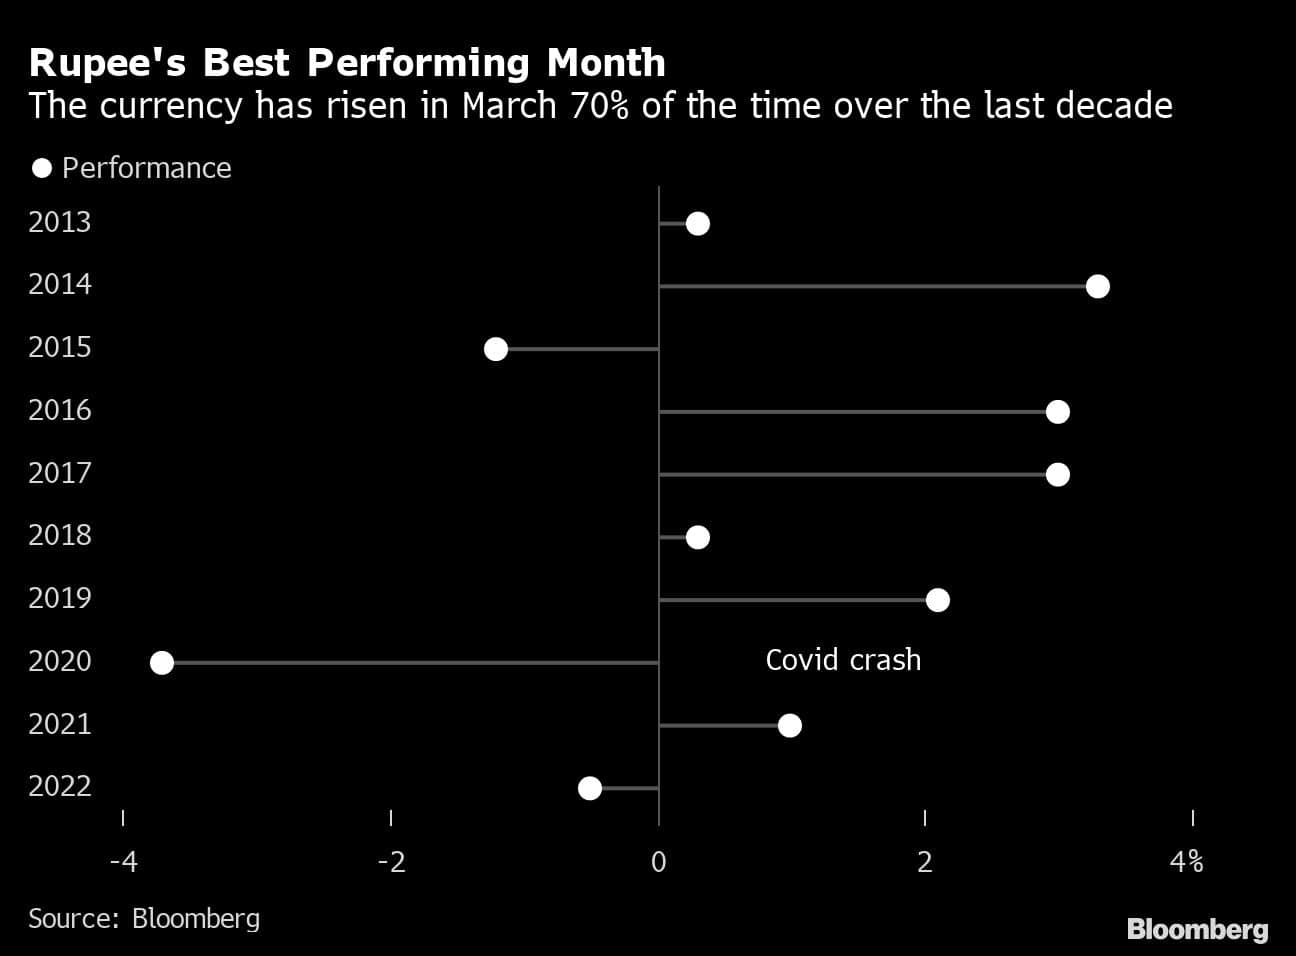 Rupee's Best Performing Month | The currency has risen in March 70% of the time over the last decade